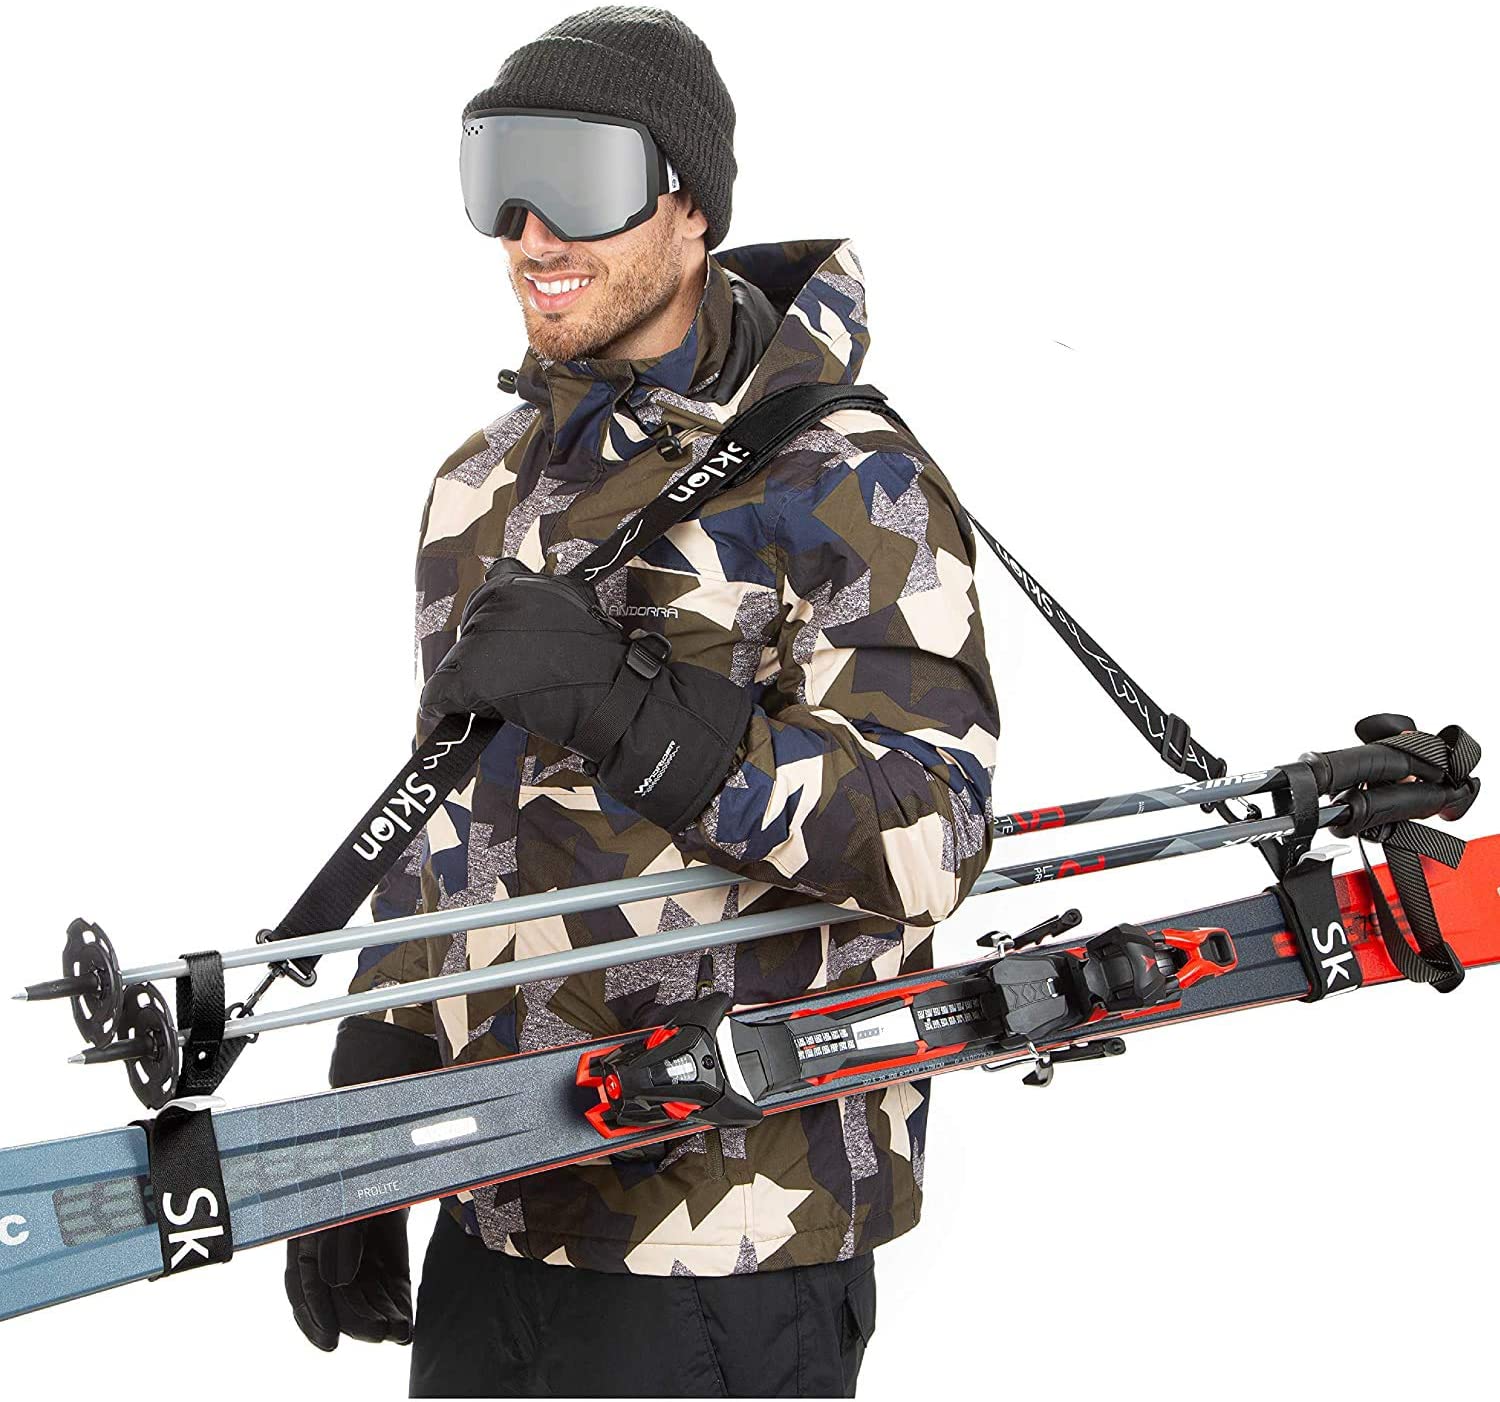 Ski Strap and Pole Carrier